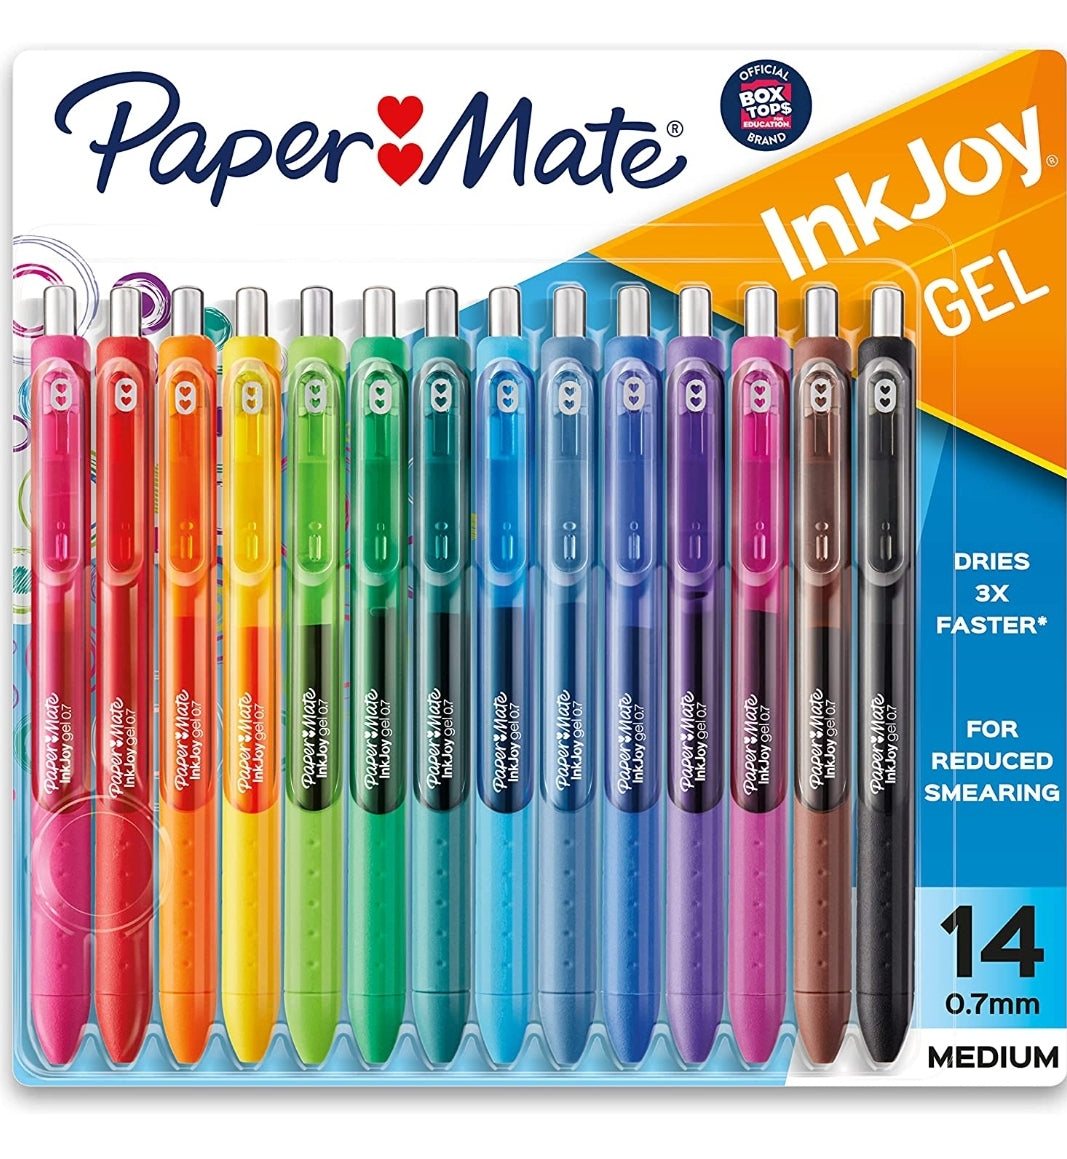 Our Colorful Choice for Colorful Gel Pens